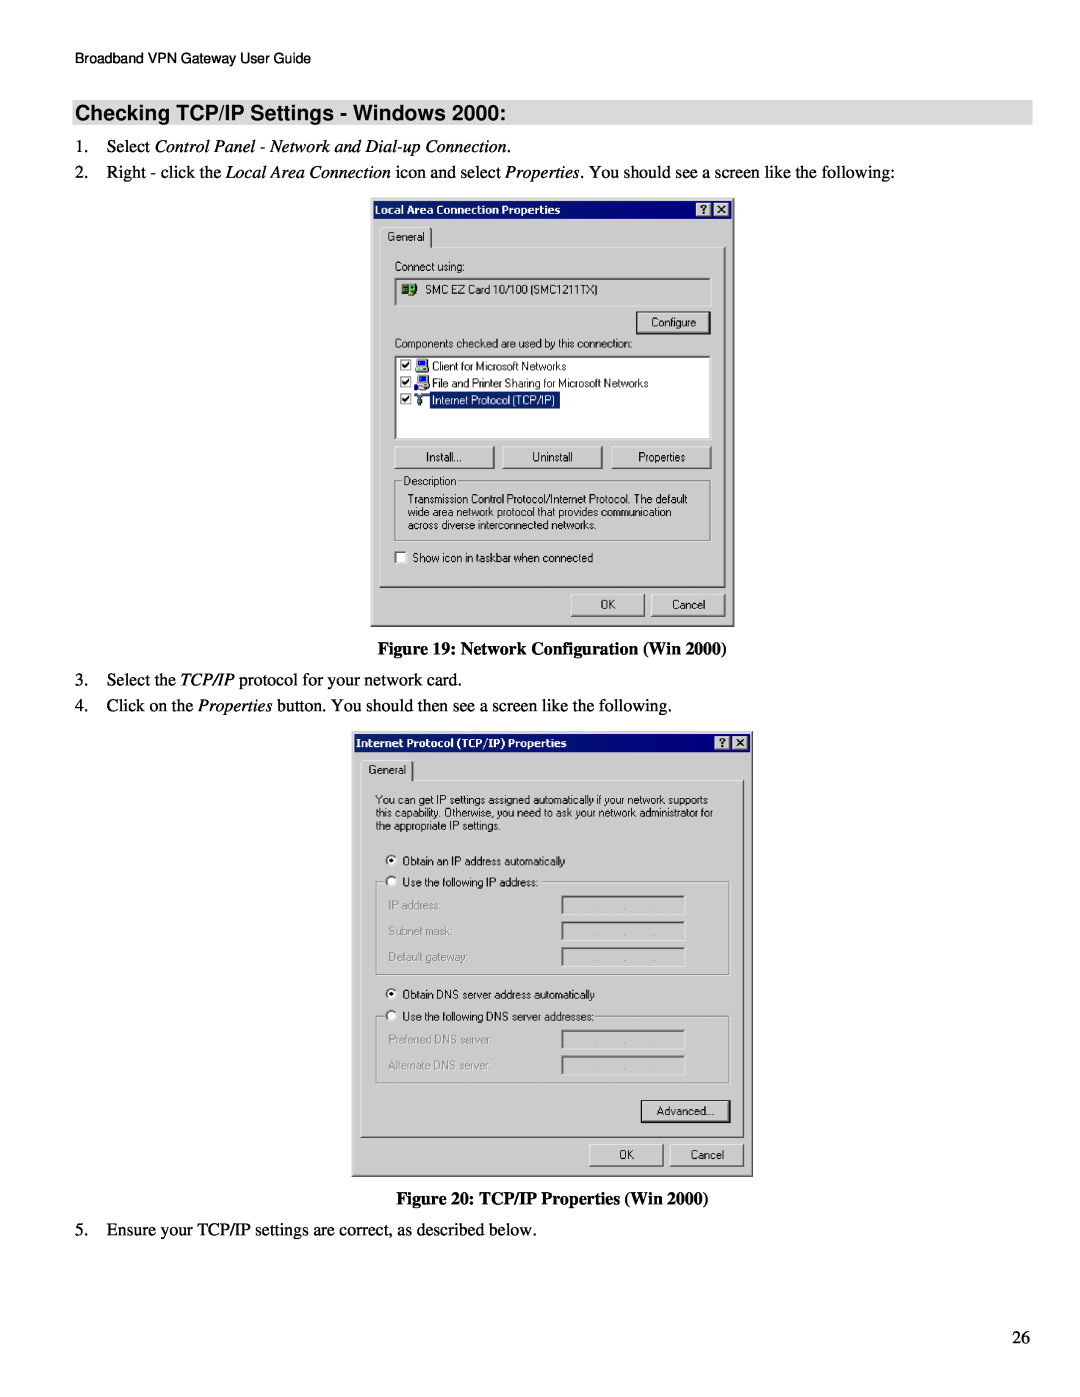 TRENDnet TW100-BRV324 manual Checking TCP/IP Settings - Windows, Select Control Panel - Network and Dial-up Connection 